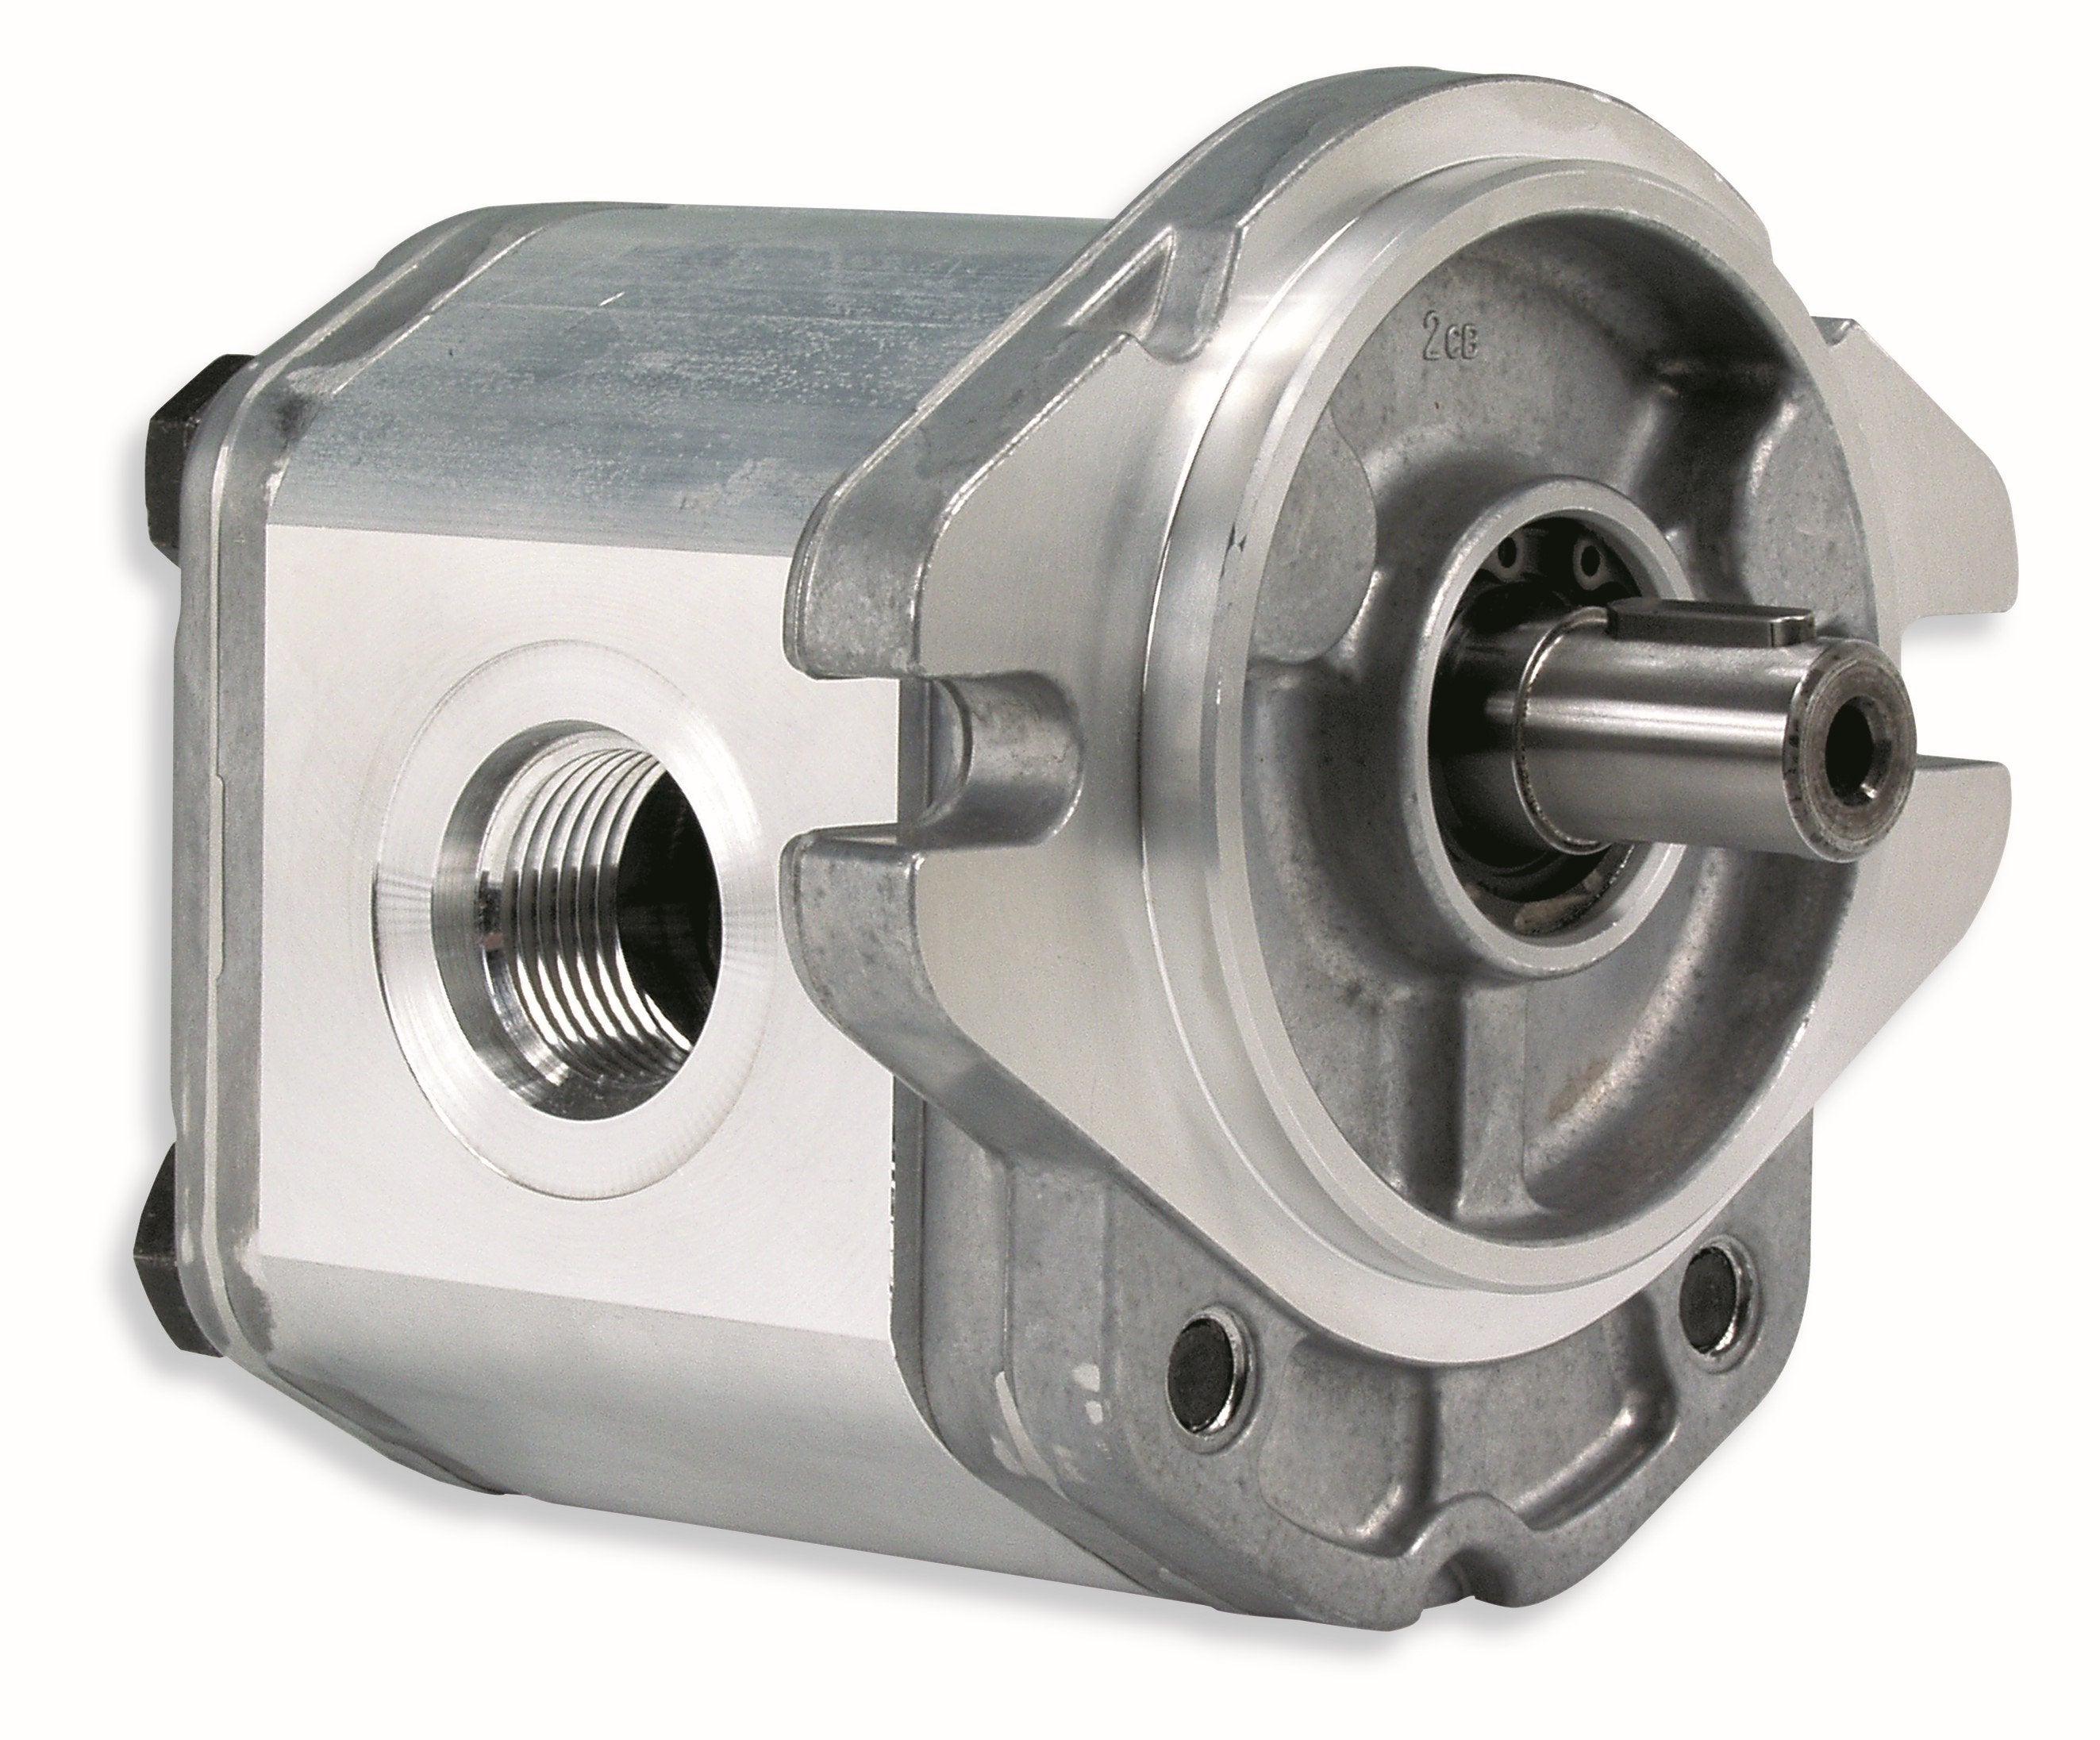 GHM3A-R-33-S1-FA-E4 : Marzocchi Gear Motor, Bidirectional, 22cc, 4060psi rated, 3500RPM, 1" #16 SAE ports, 13T 16/32DP Splined Shaft